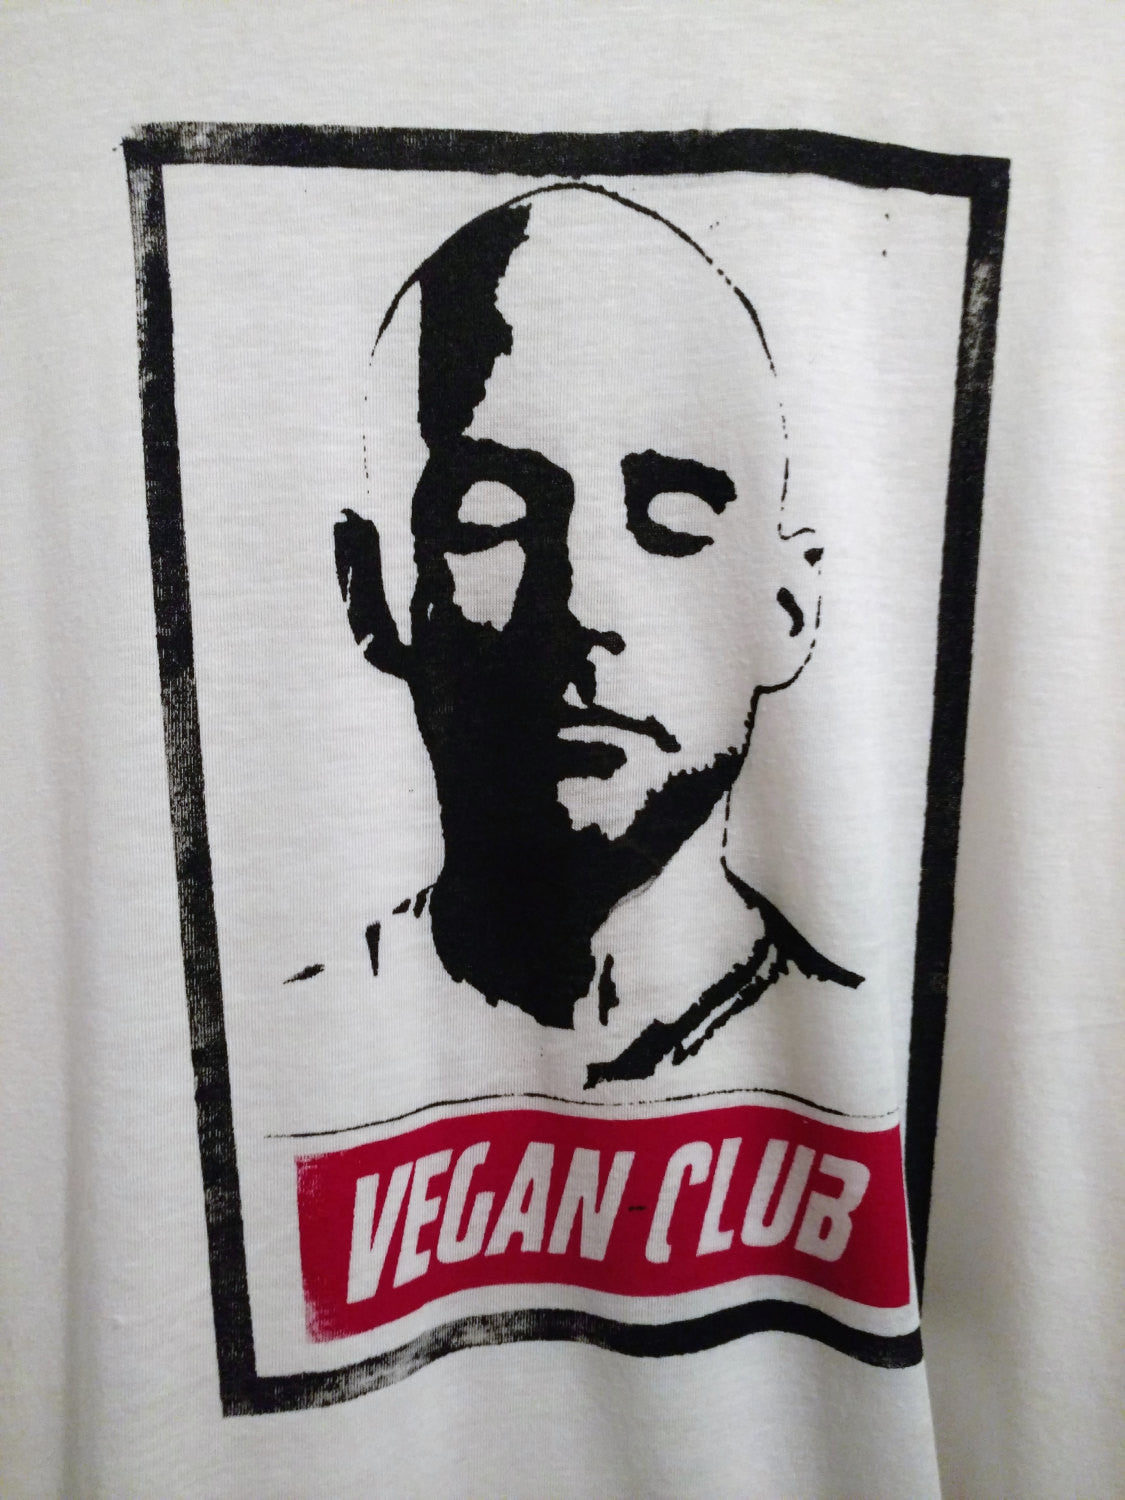 Organic Made in USA T-shirt "Vegan Club" featuring Moby